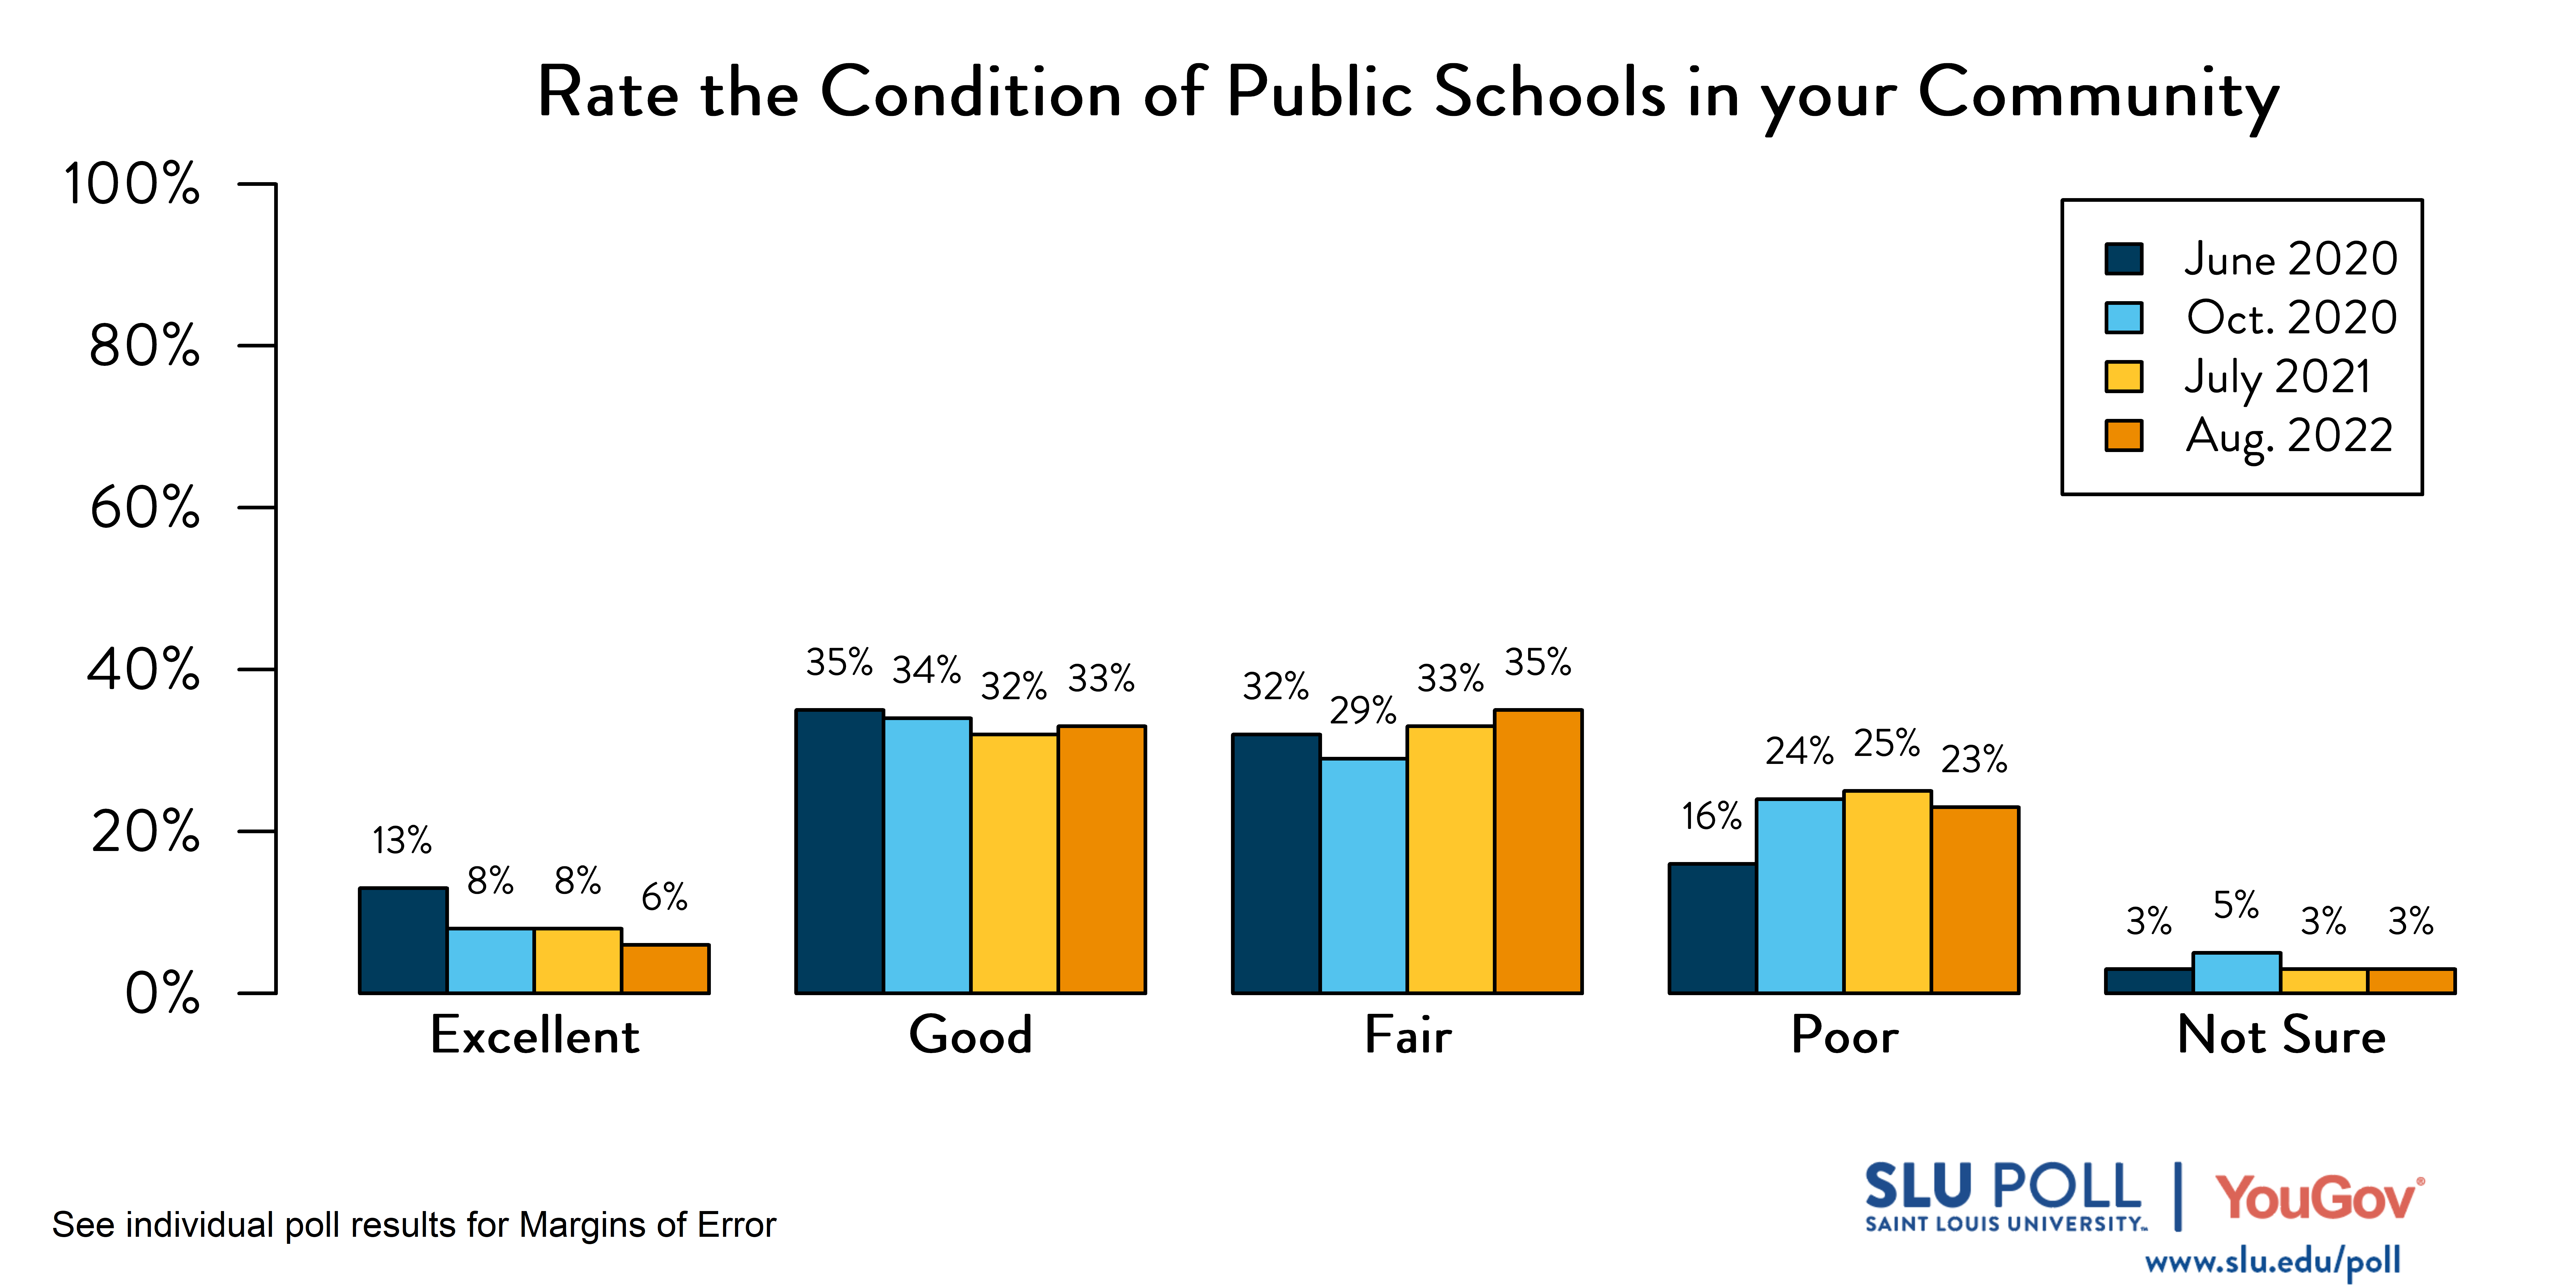 Likely voters' responses to 'How would you rate the following: Public Schools in your community?'. June 2020 Voter Responses 13% Excellent, 35% Good, 32% Fair, 16% Poor, and 3% Not Sure. October 2020 Voter Responses: 8% Excellent, 34% Good, 29% Fair, 24% Poor, and 5% Not sure. July 2021 Voter Responses: 8% Excellent, 32% Good, 33% Fair, 25% Poor, and 3% Not sure. August 2021 Voter Responses: 6% Excellent, 33% Good, 35% Fair, 23% Poor, and 3% Not sure.